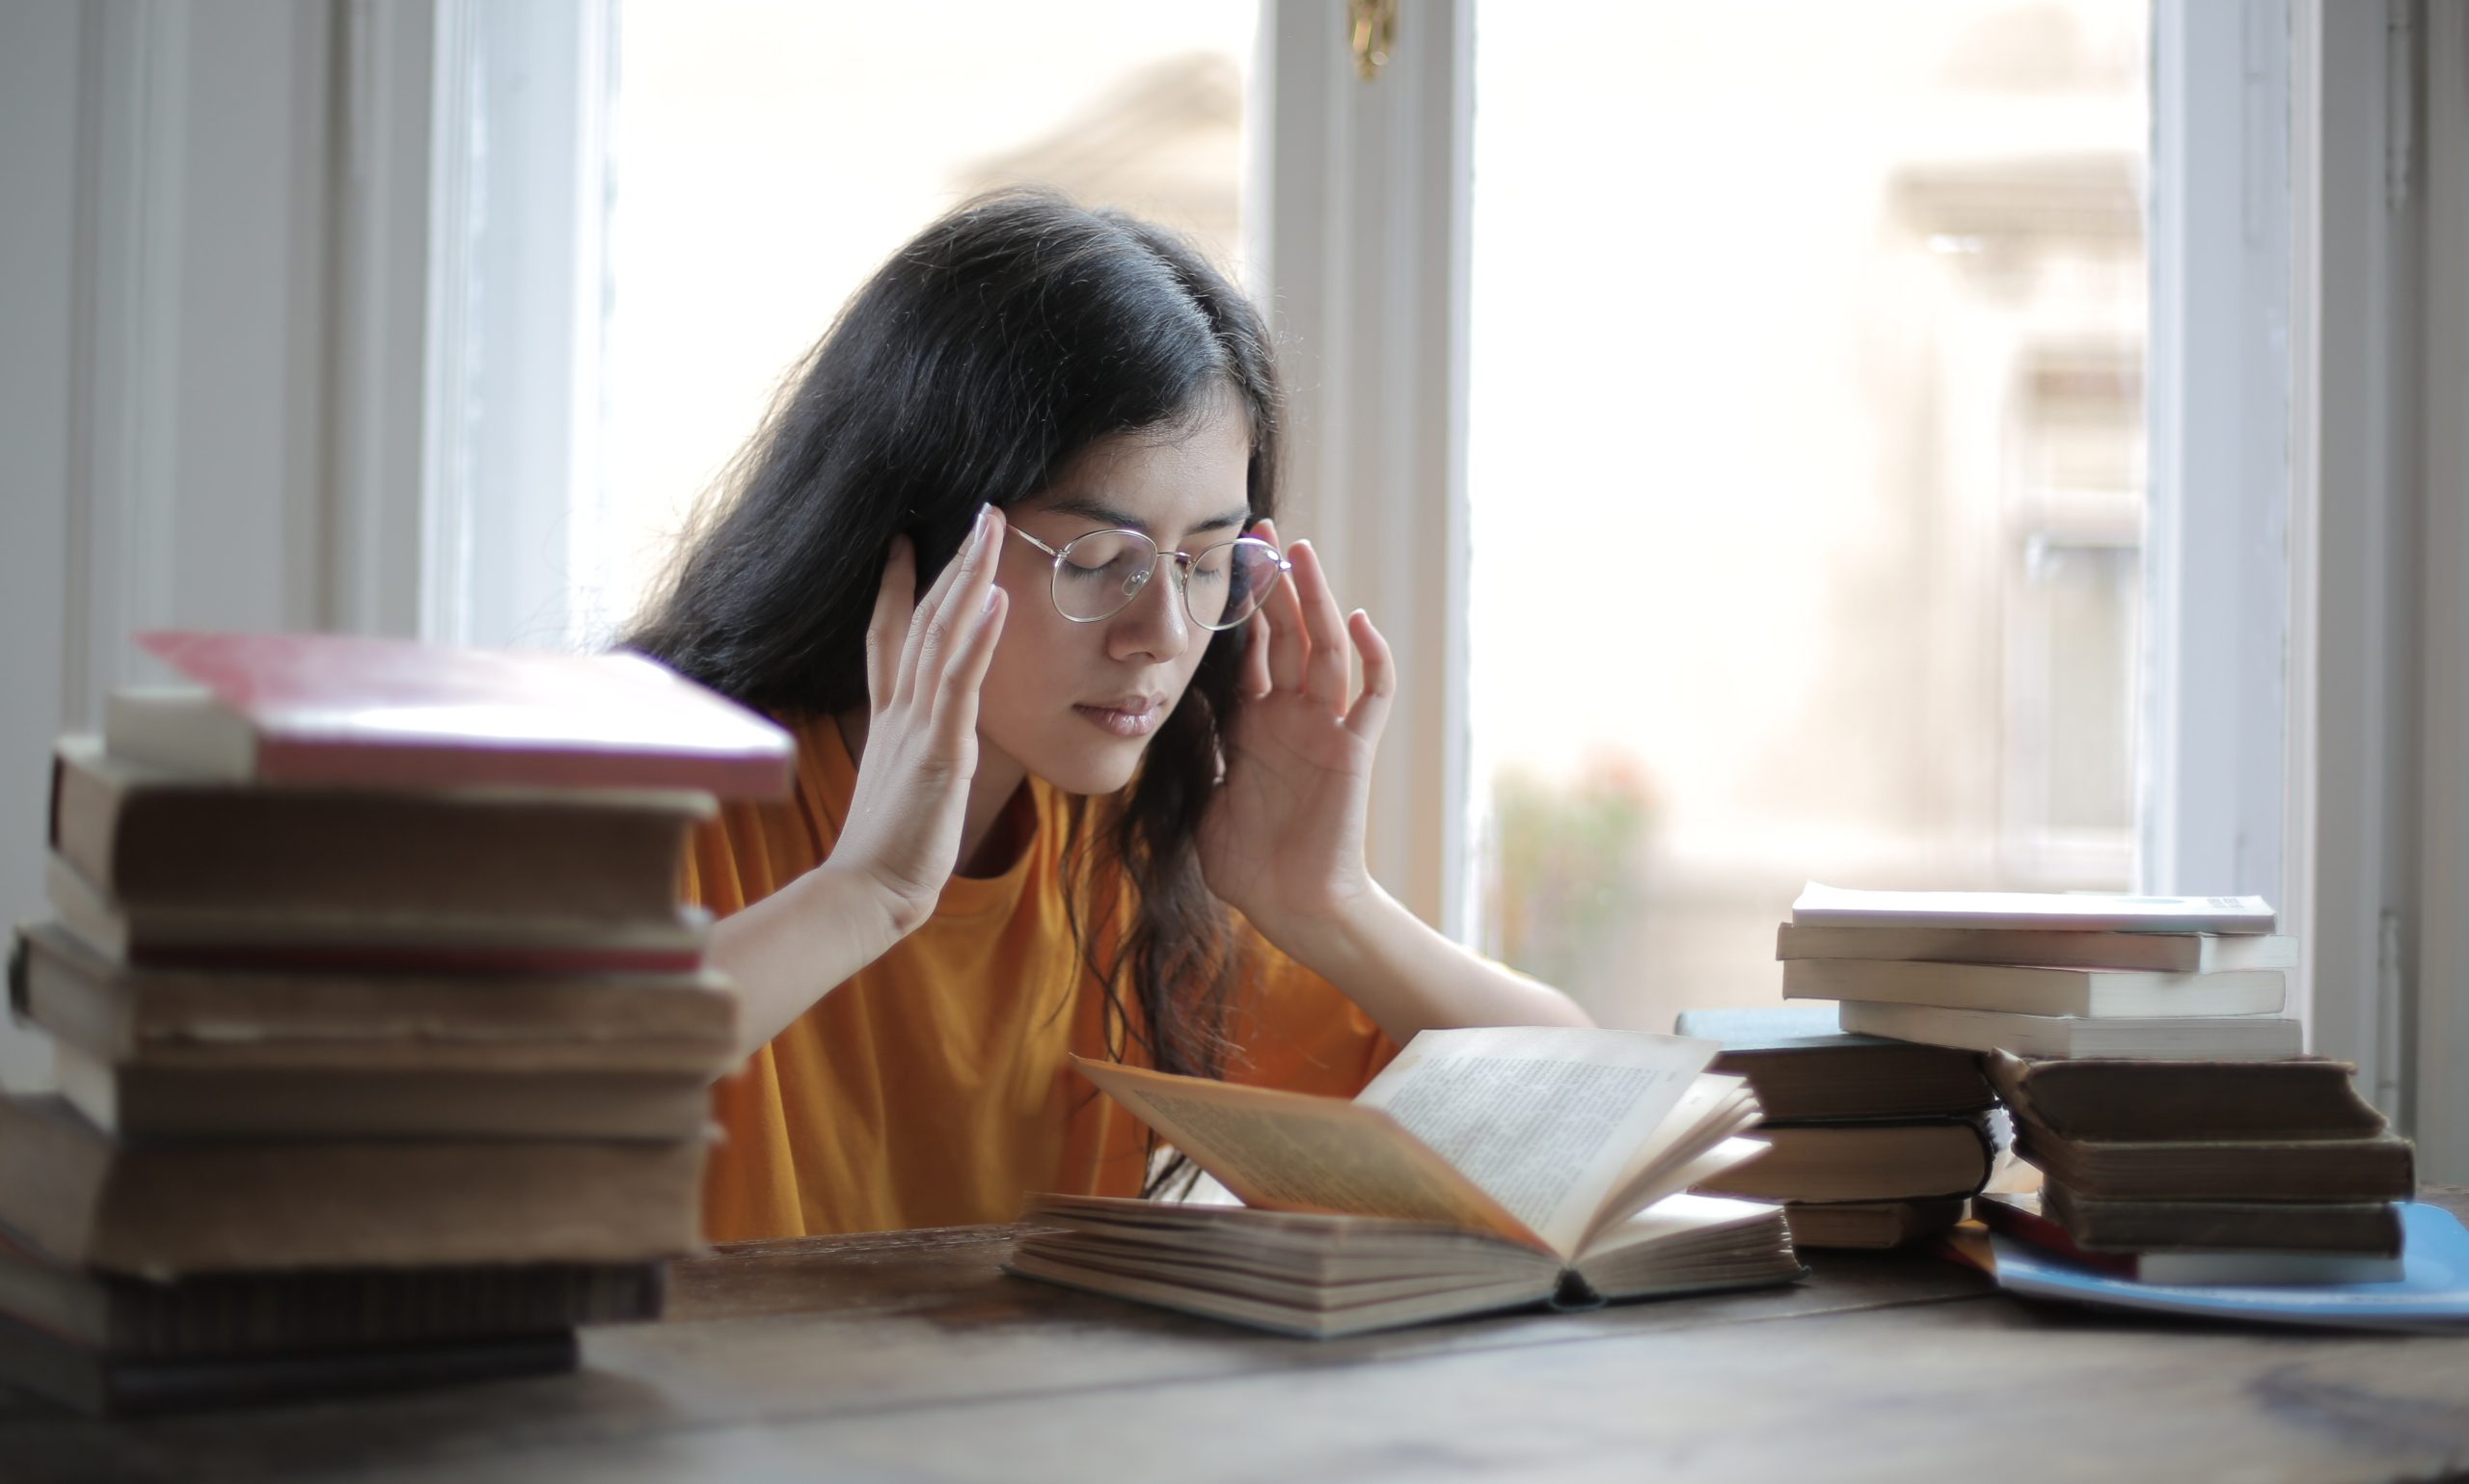 A photo of a female student with glasses struggling to concentrate on her work.